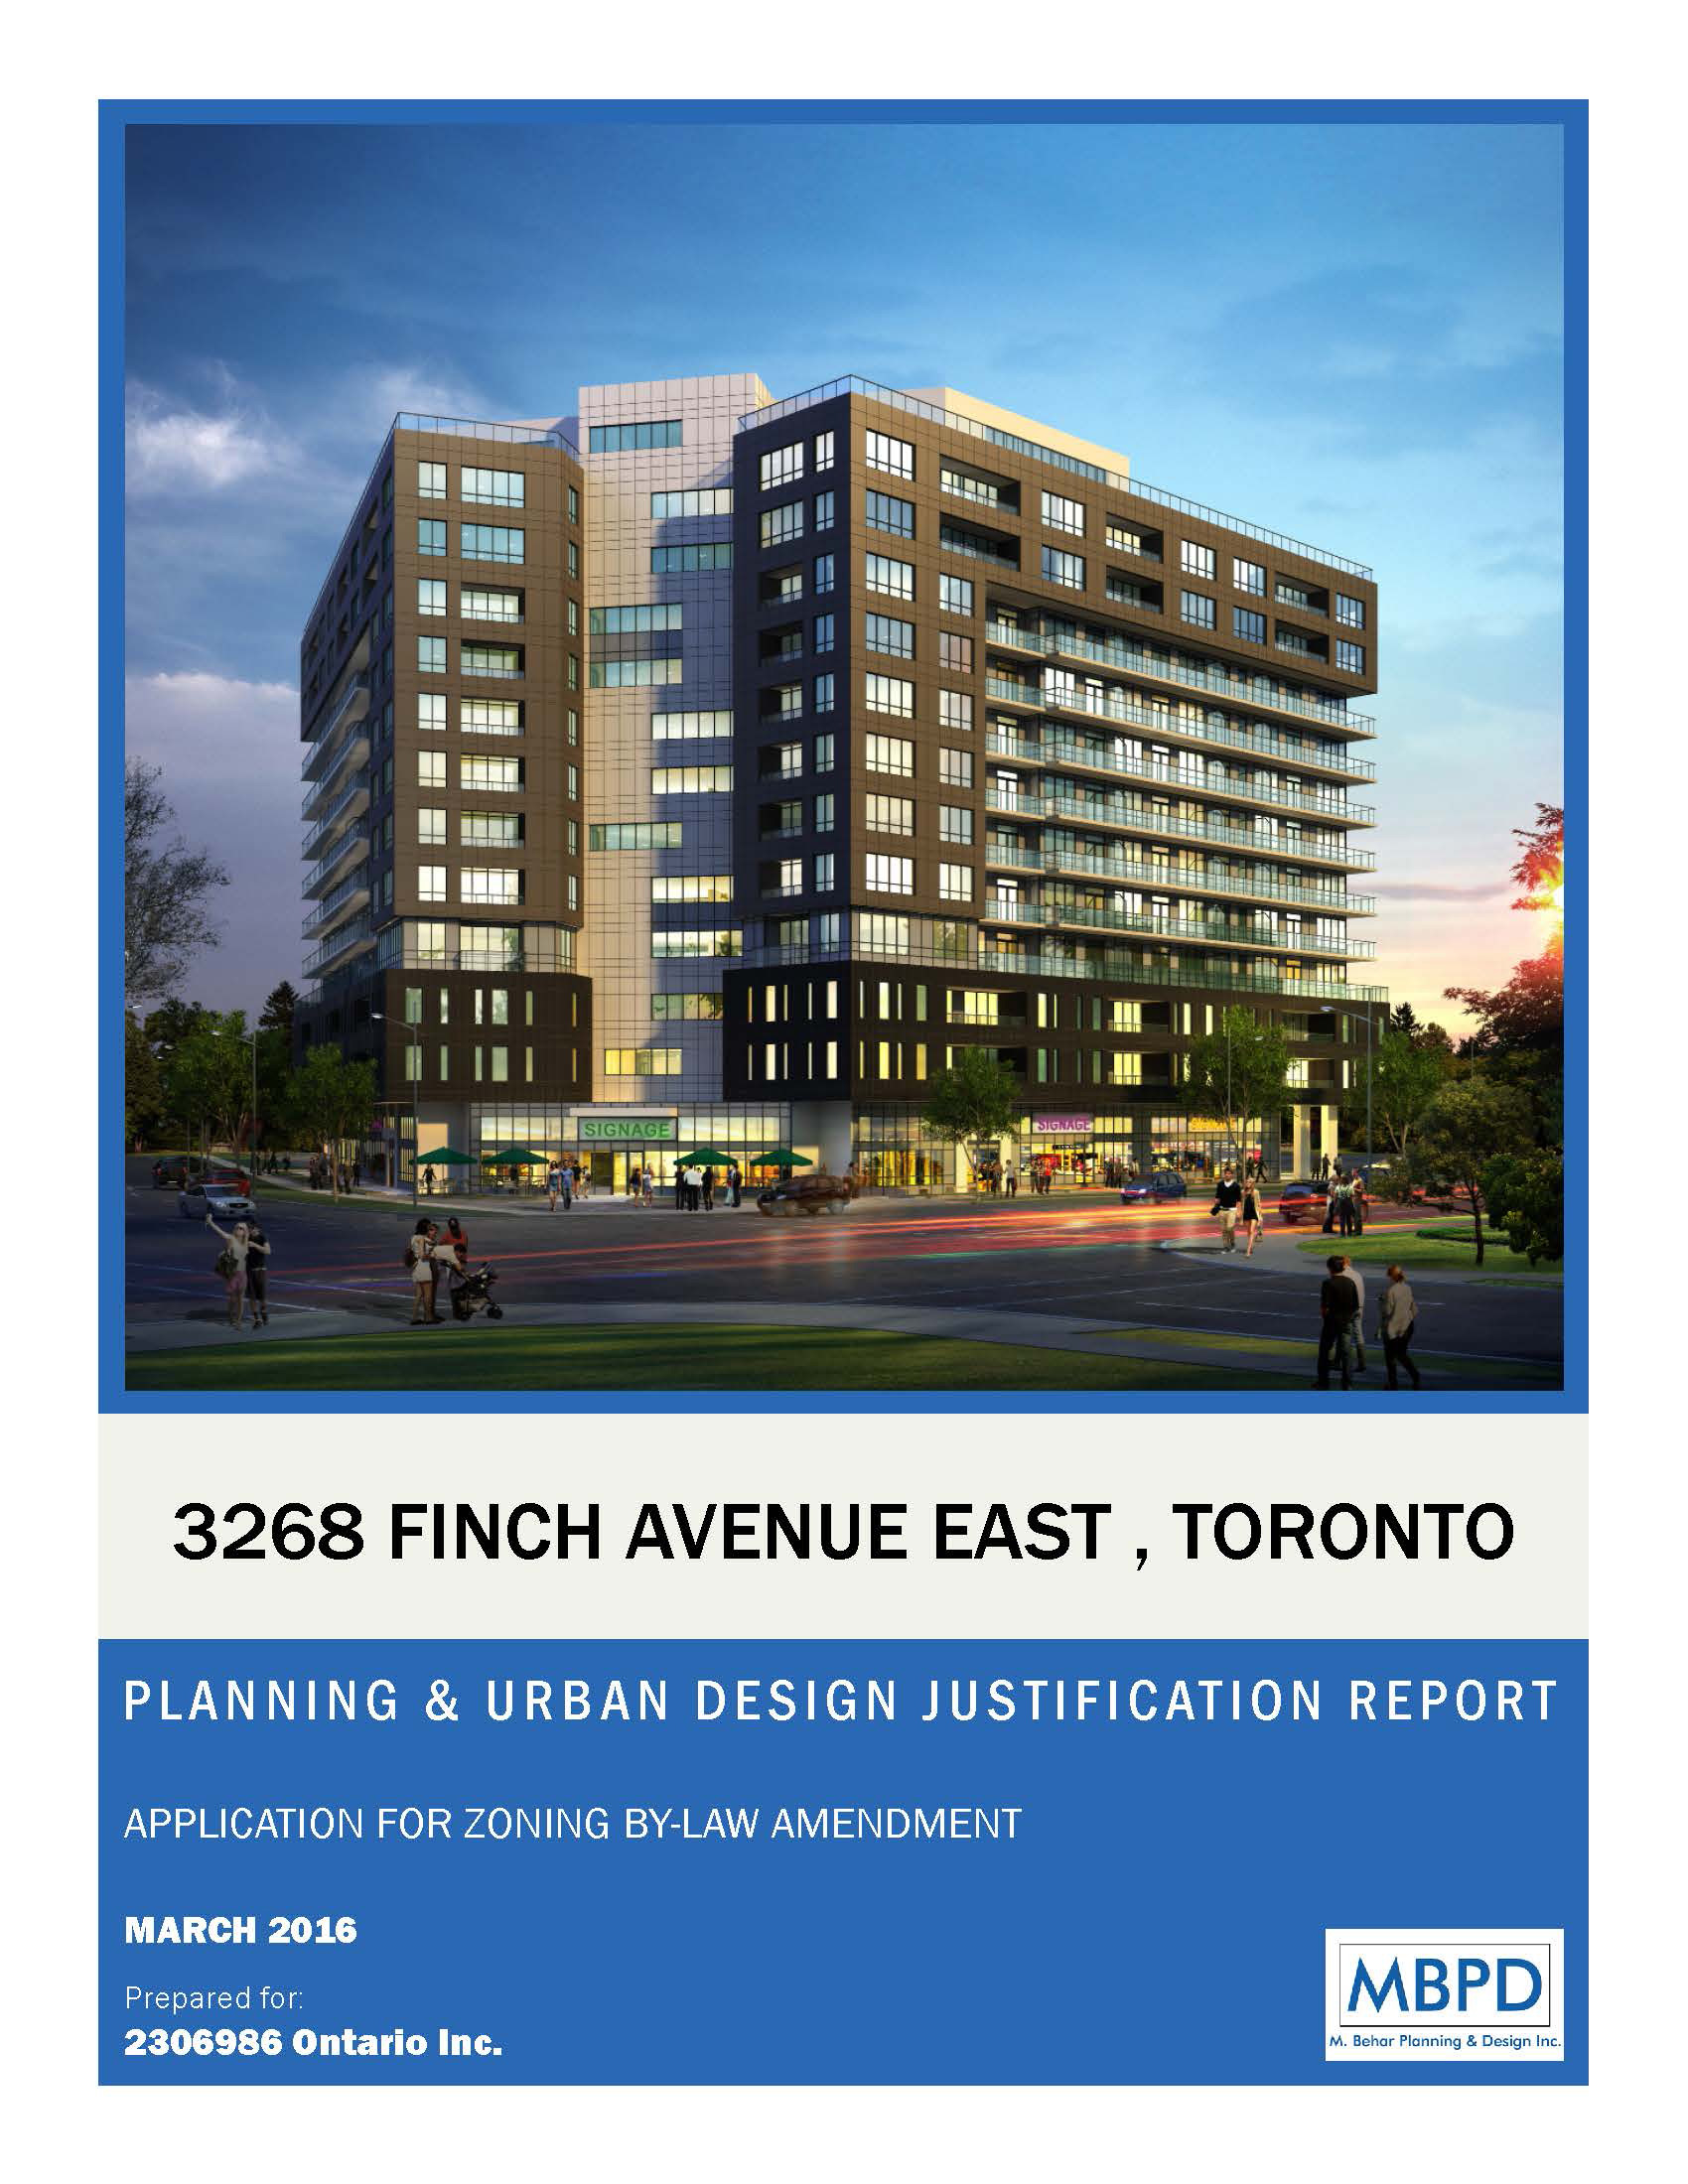 3268-Finch-Ave-Planning-Justification-UD-Rationale-FINAL-March-2016